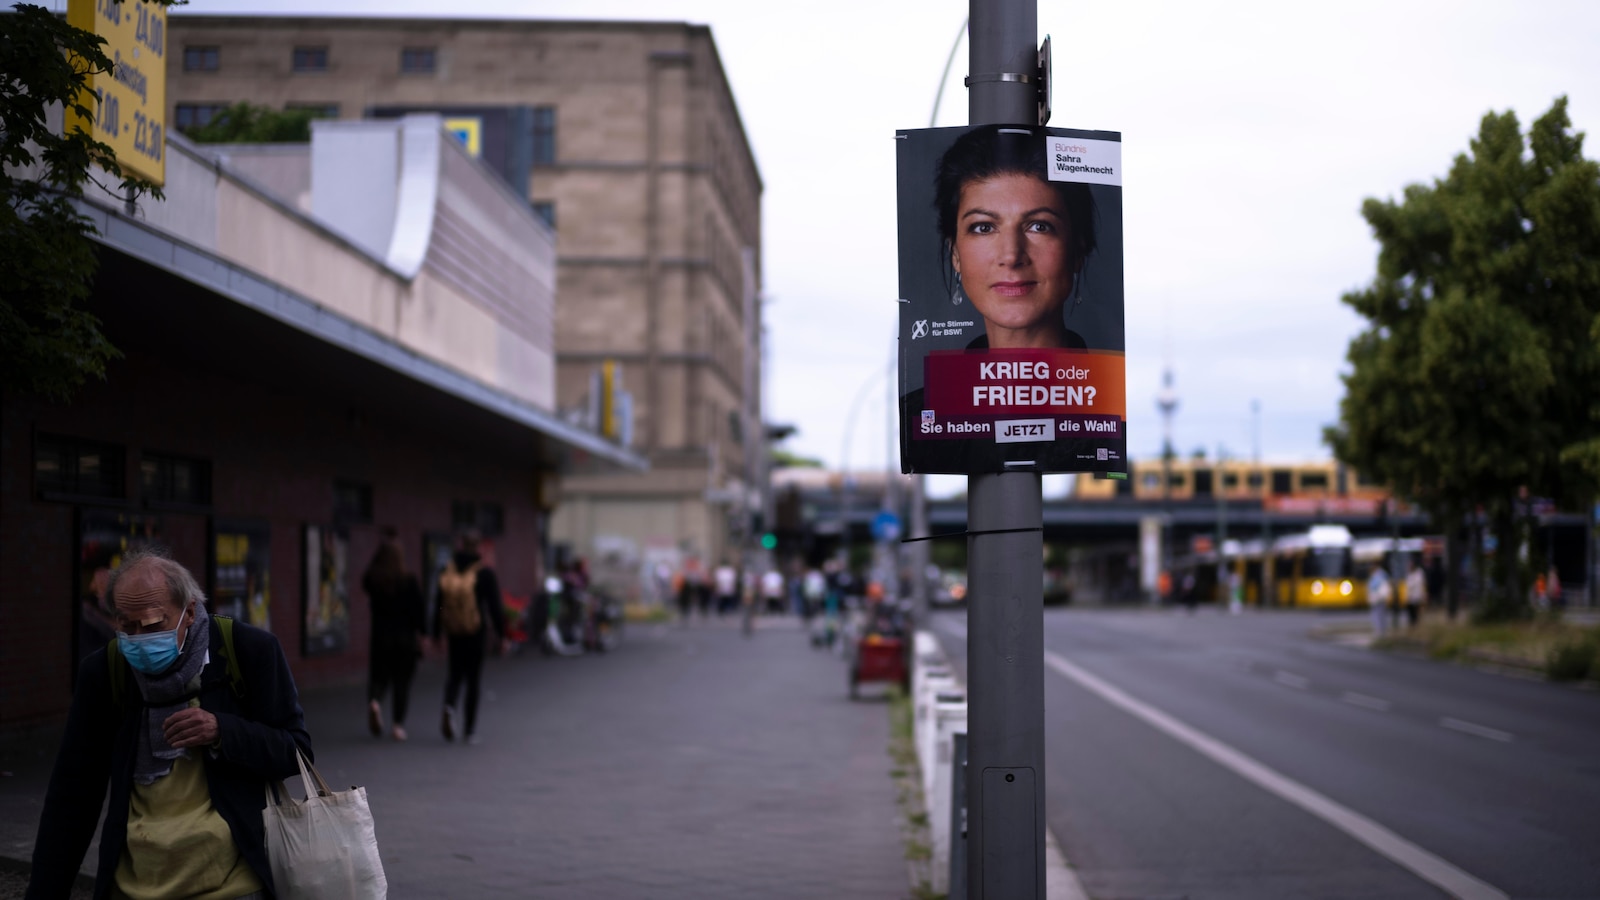 The European elections are testing an unpopular government and a scandal-hit far-right party in Germany